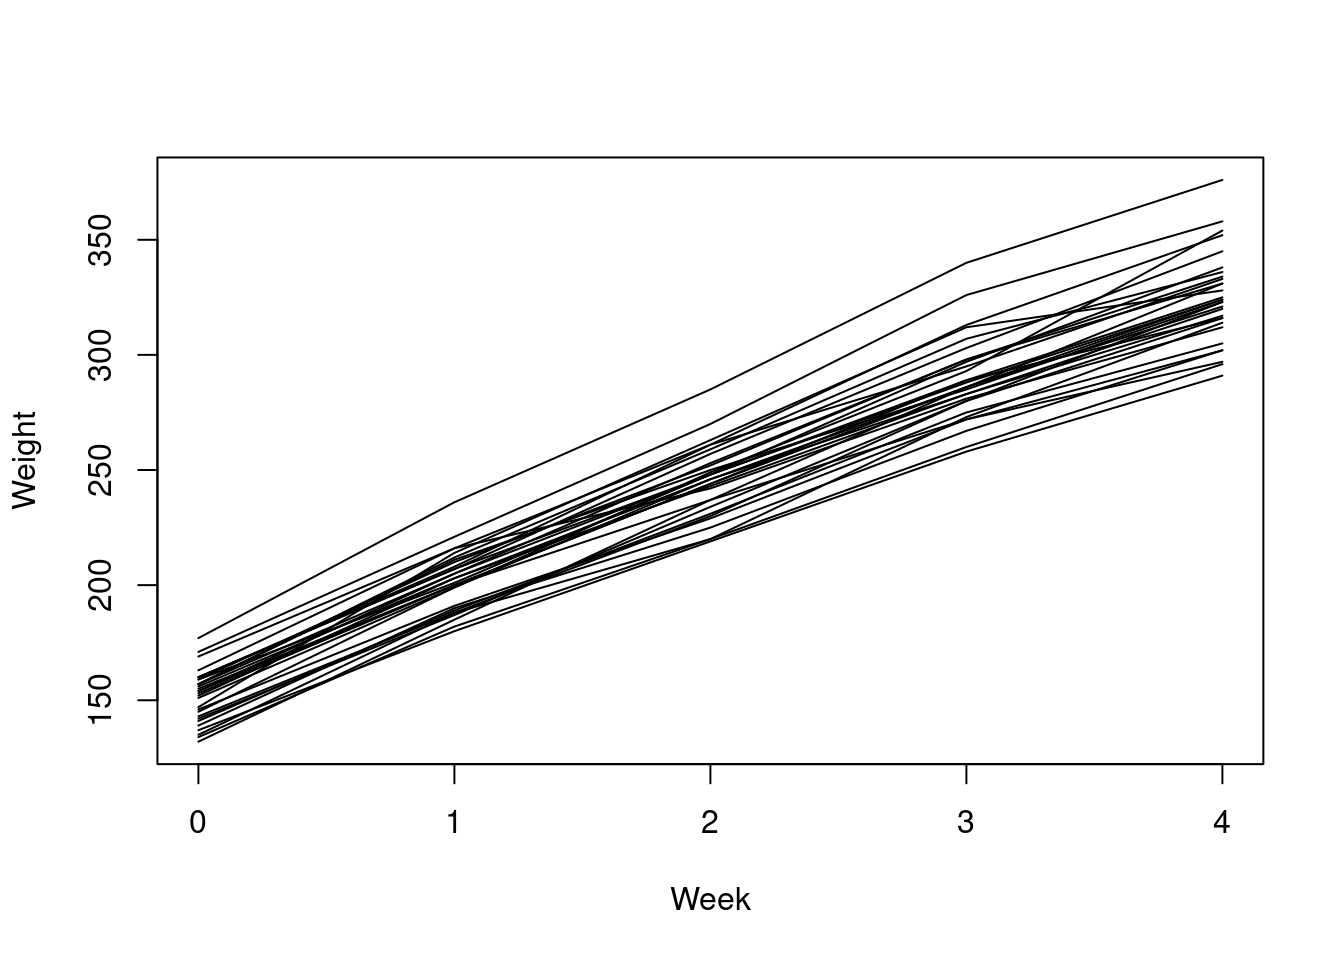 Individual rat weight by week, for the rat growth data